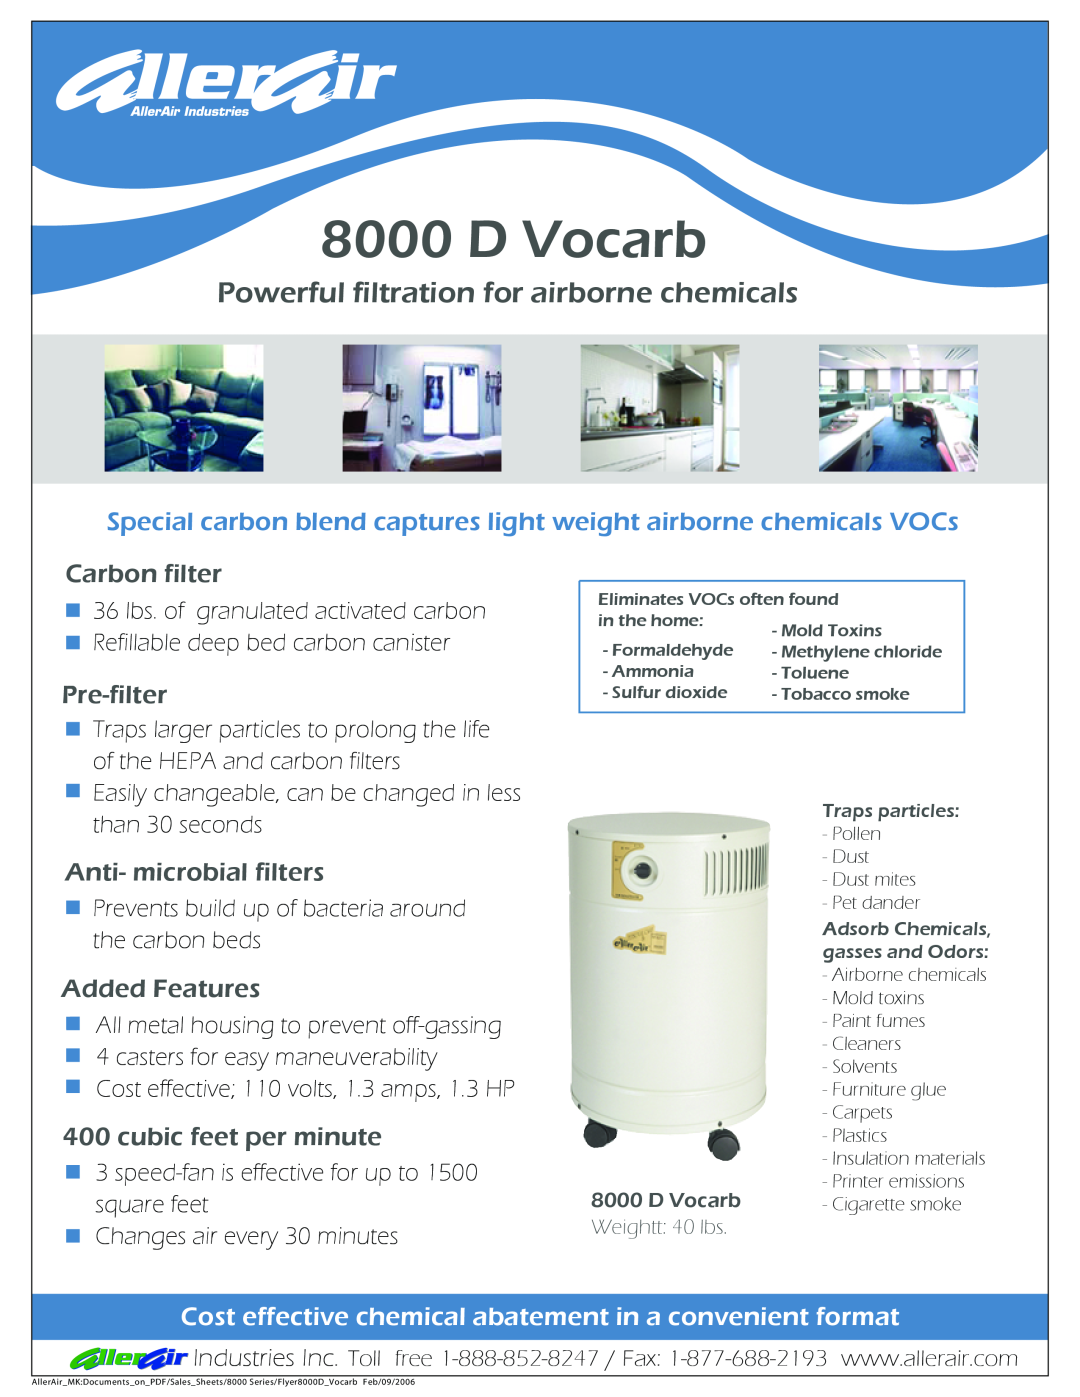 AllerAir 8000 D Vocarb manual Powerful filtration for airborne chemicals, Carbon filter, Pre-filter, Added Features 